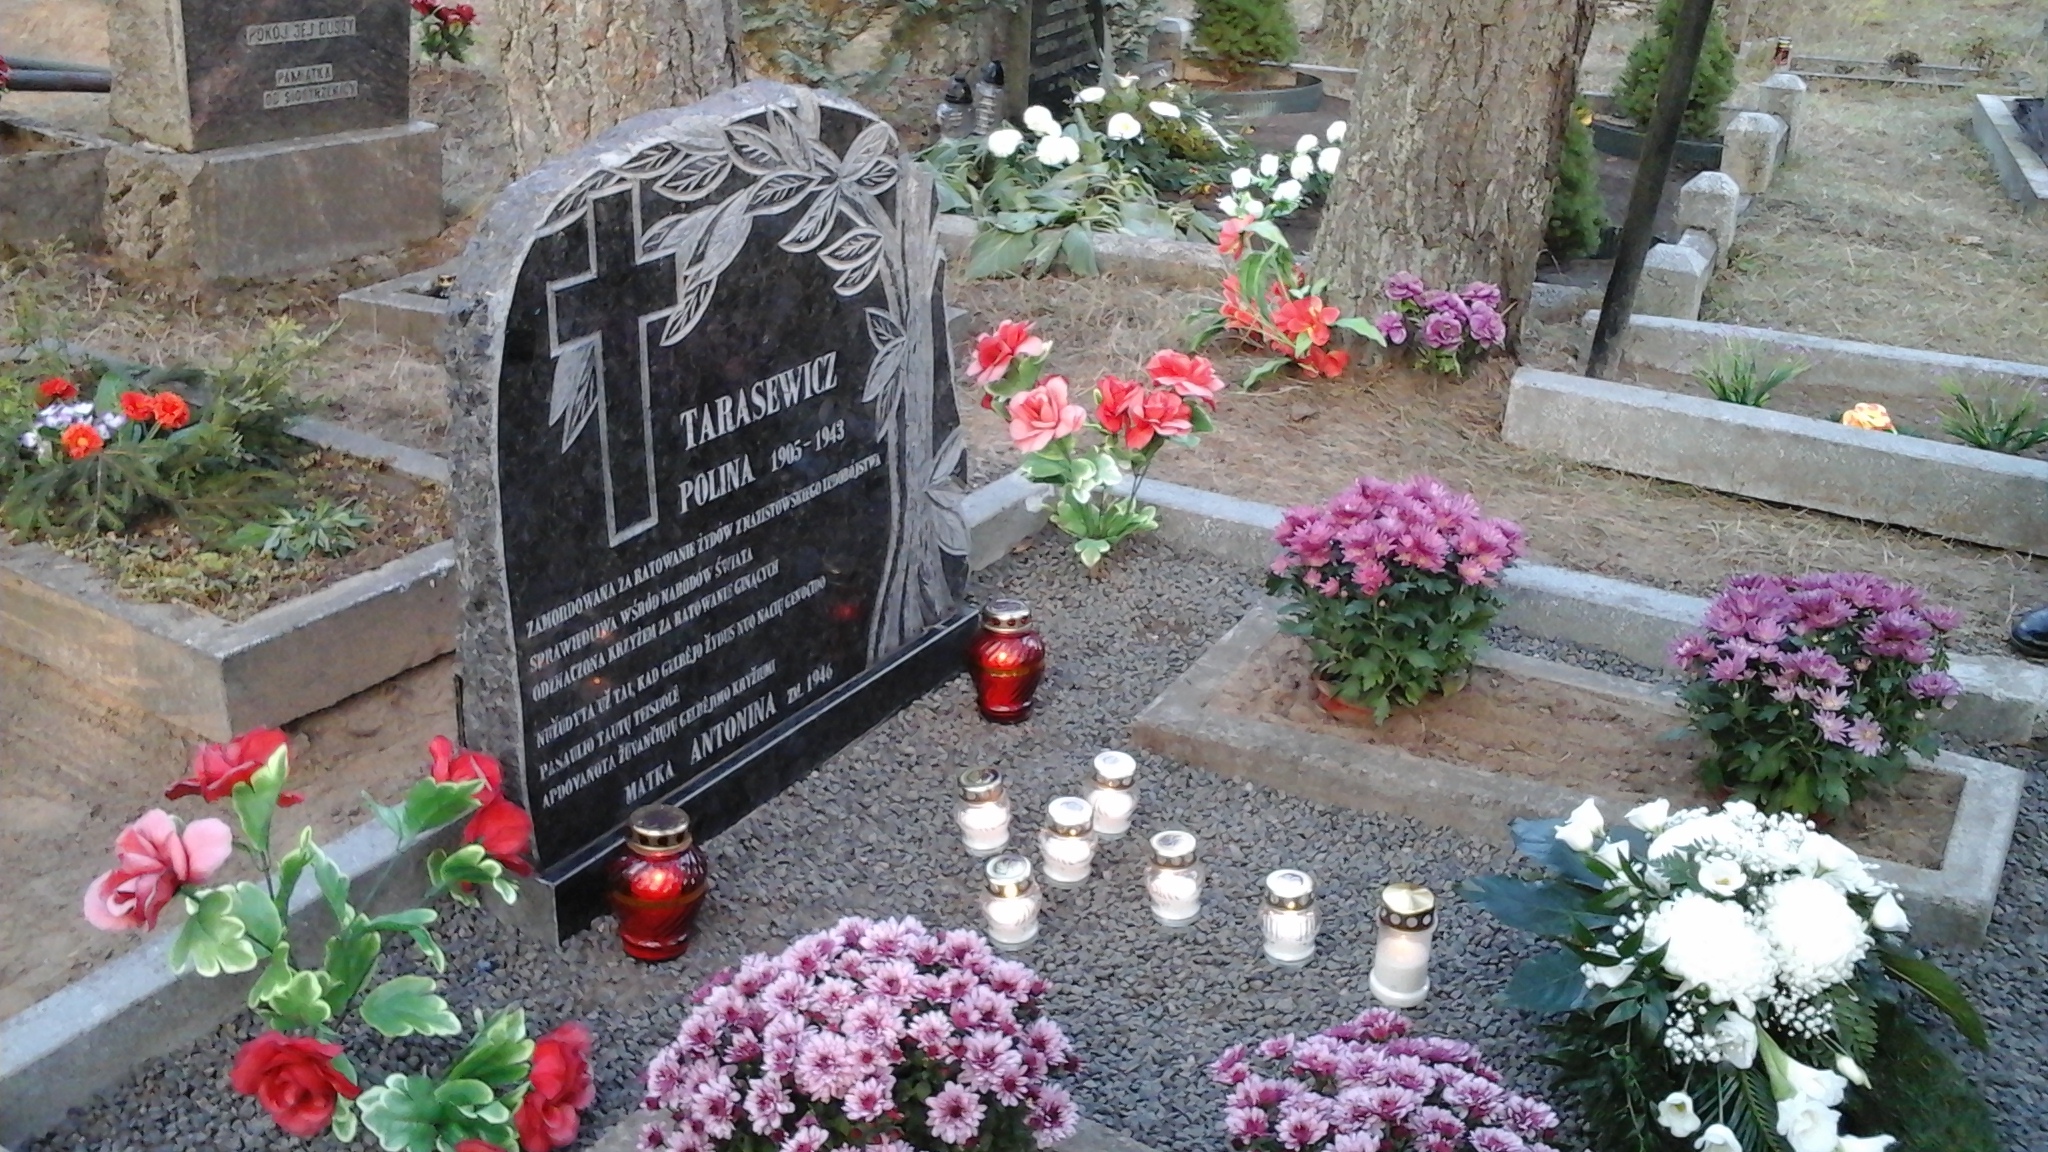 New Monument Unveiled to Commemorate Rescuer of Jews Polina Tarasewicz